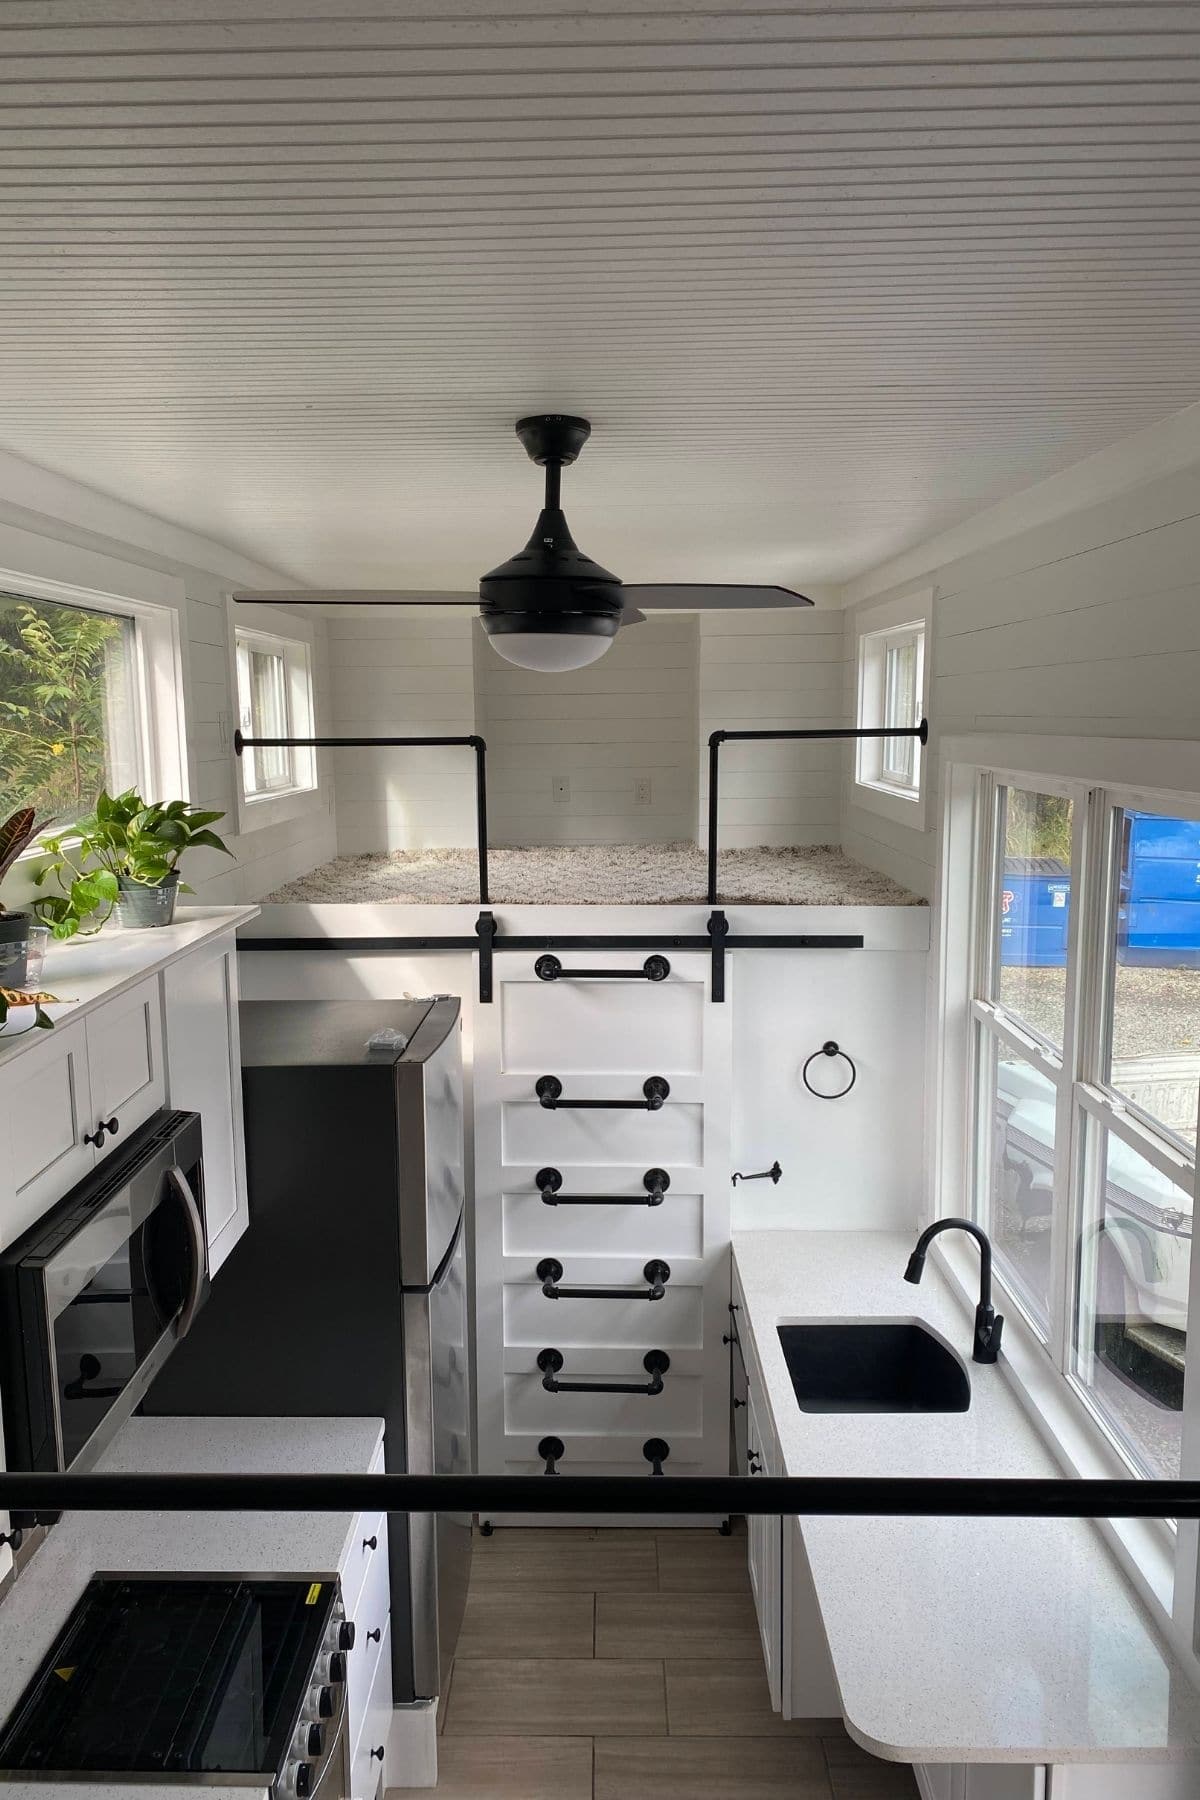 tiny home interior with kitchen cabinets on both sides and white door to bathroom at end